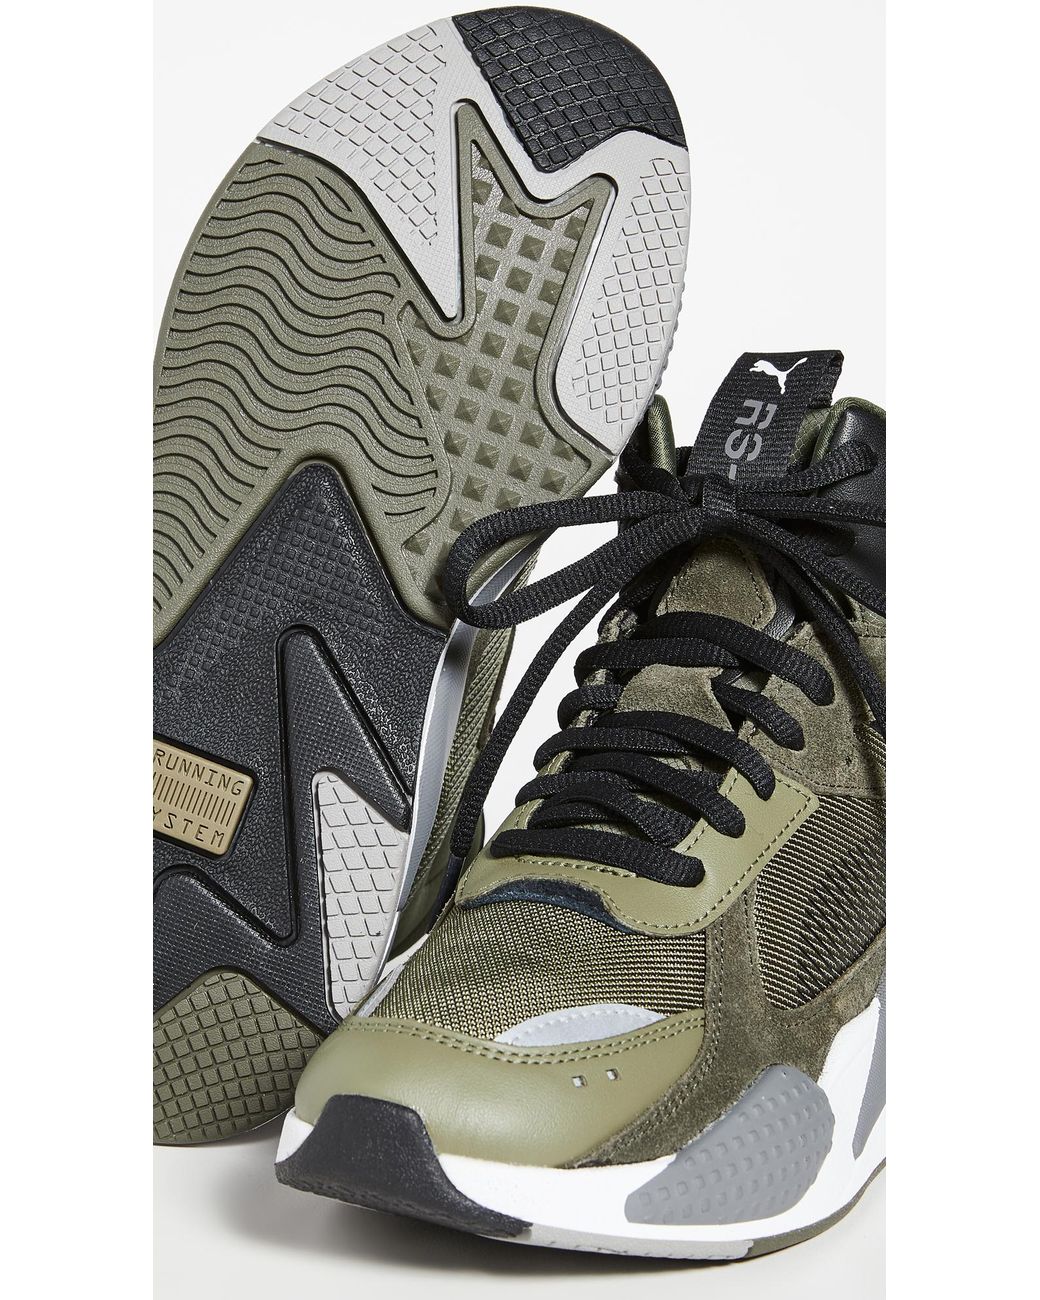 PUMA Rubber Rs-x Midtop Utility Sneakers | Lyst